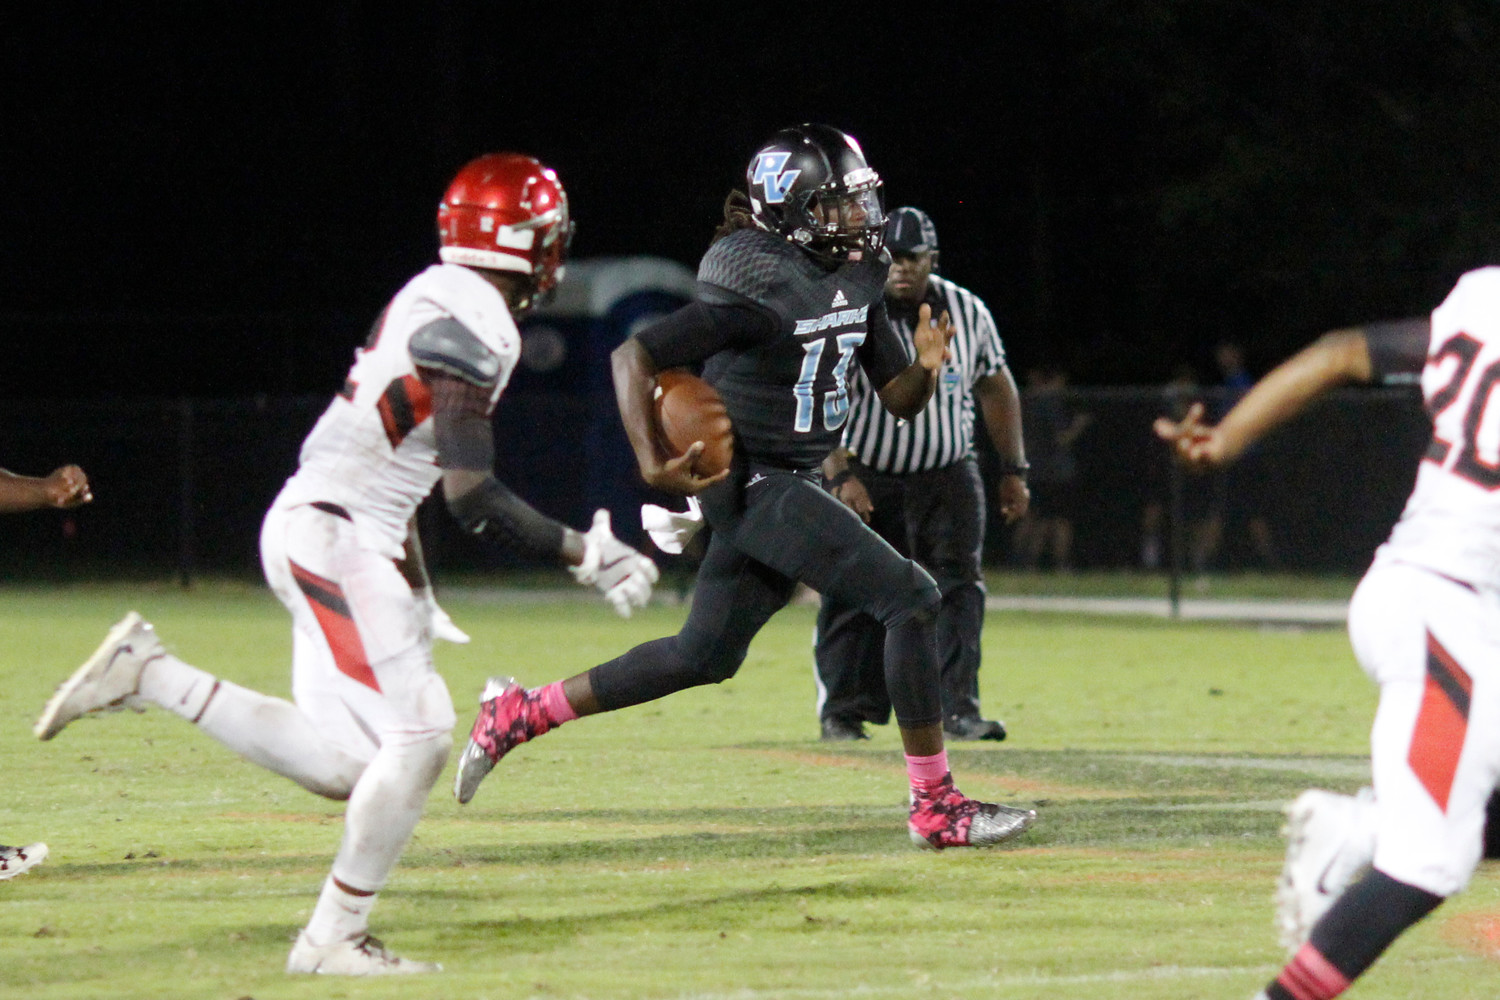 QB Jacoby Myers breaks a long run for the Sharks.